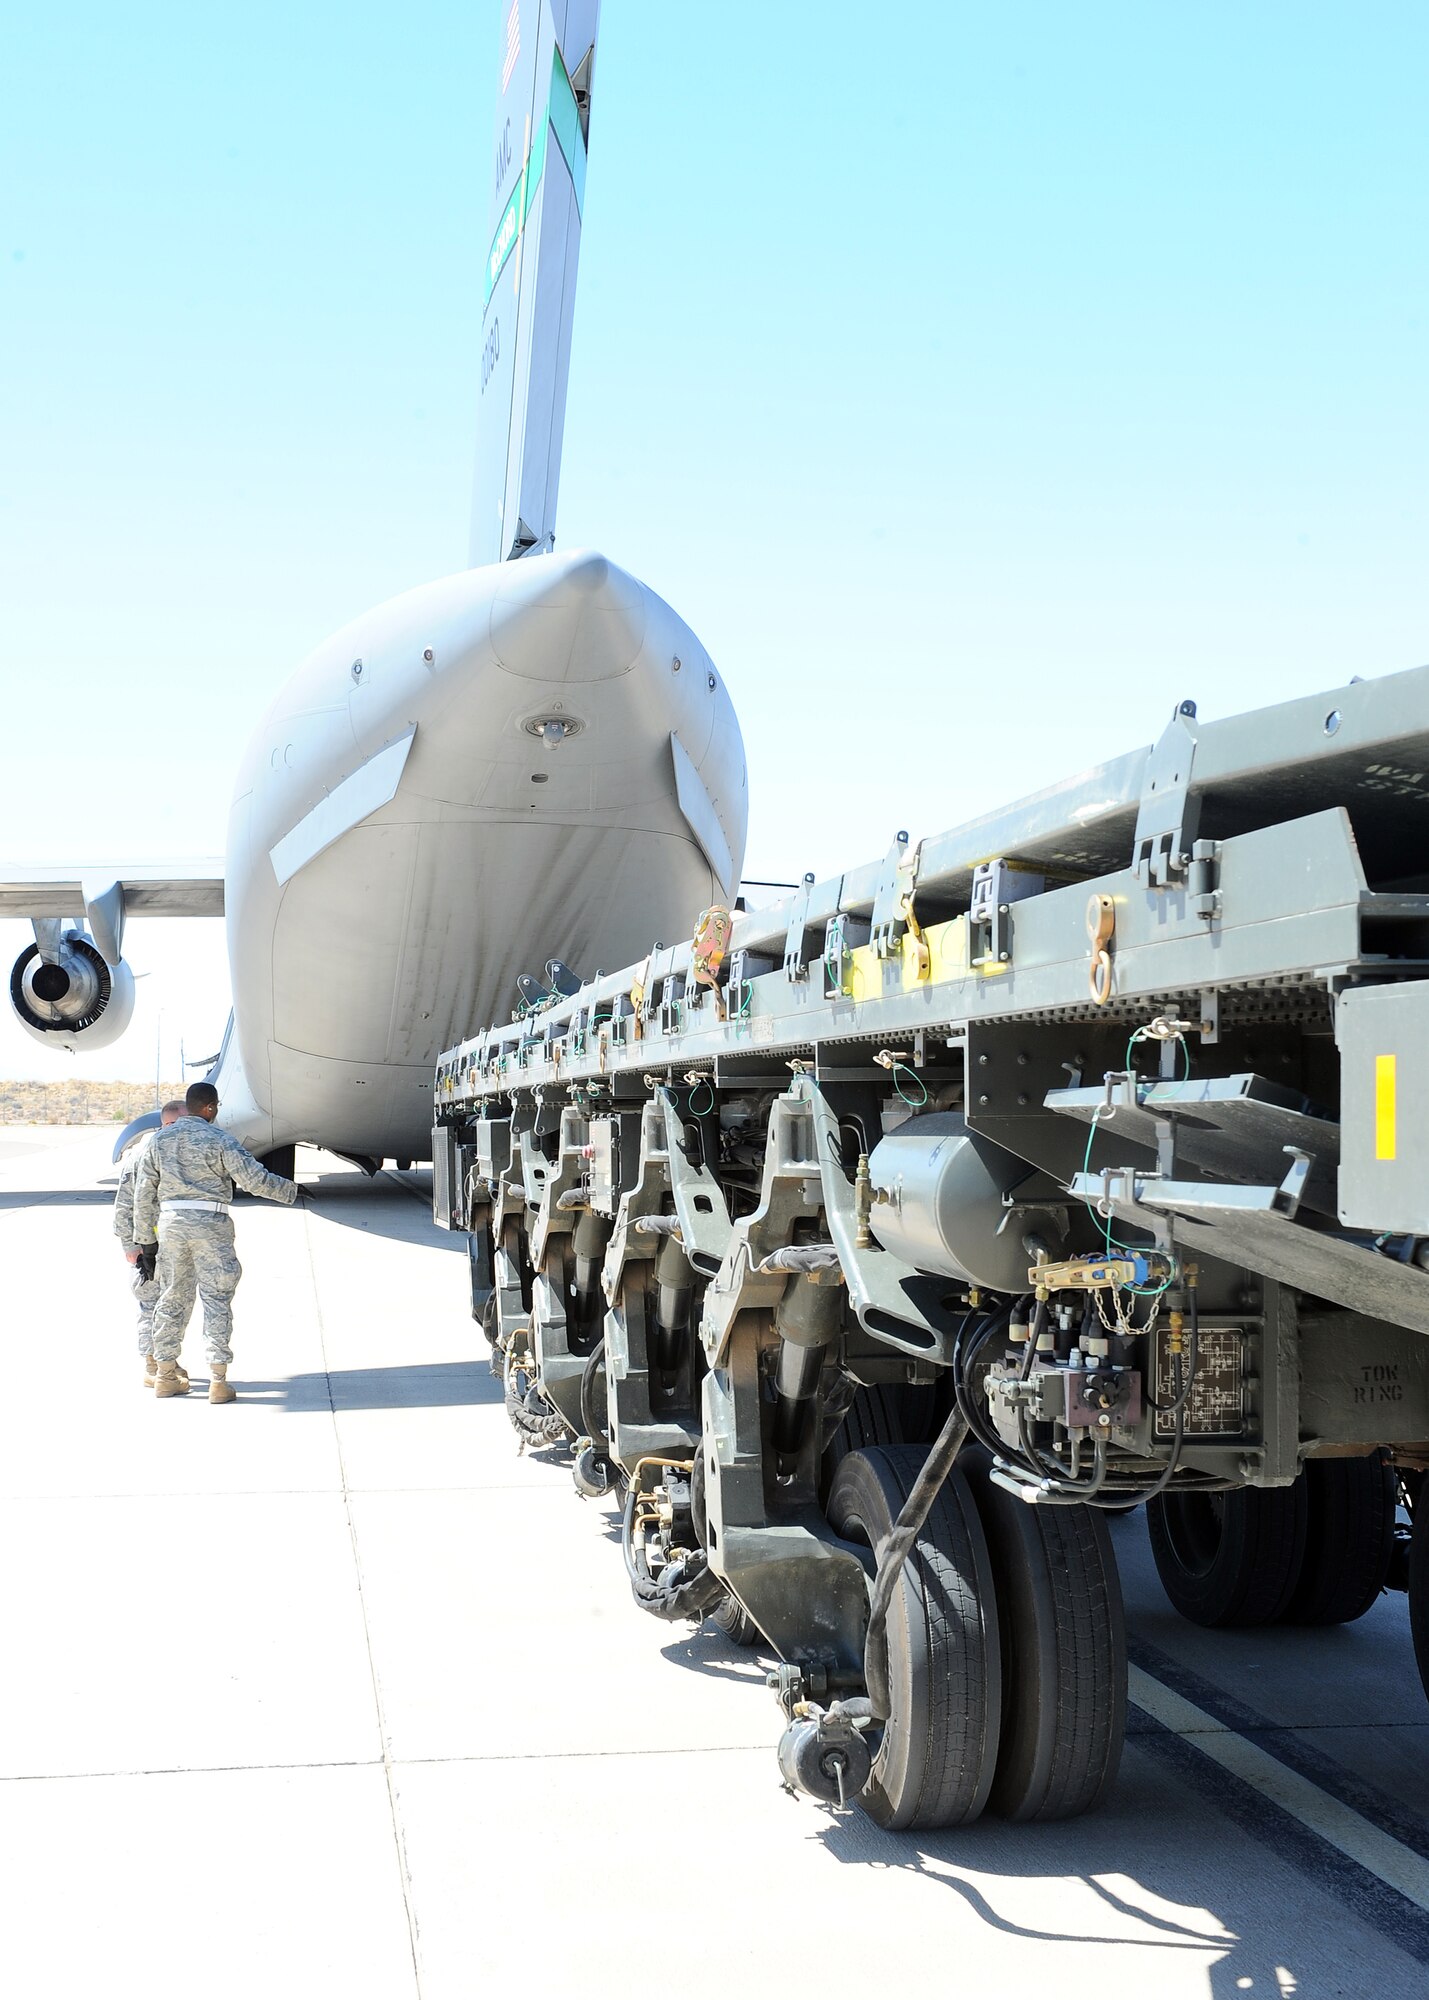 Members of the 49th Logistics Readiness Squadron load a 60,000 pond aircraft loader onto a C-17 from McChord Air Force Base, Wash., here on Holloman Air Force Base, N.M., March 3. The aircraft loader is being deployed to CENTAF to assist with cargo operations in the AOR. (U.S. Air Force photo/ Airman 1st Class DeAndre Curtiss)